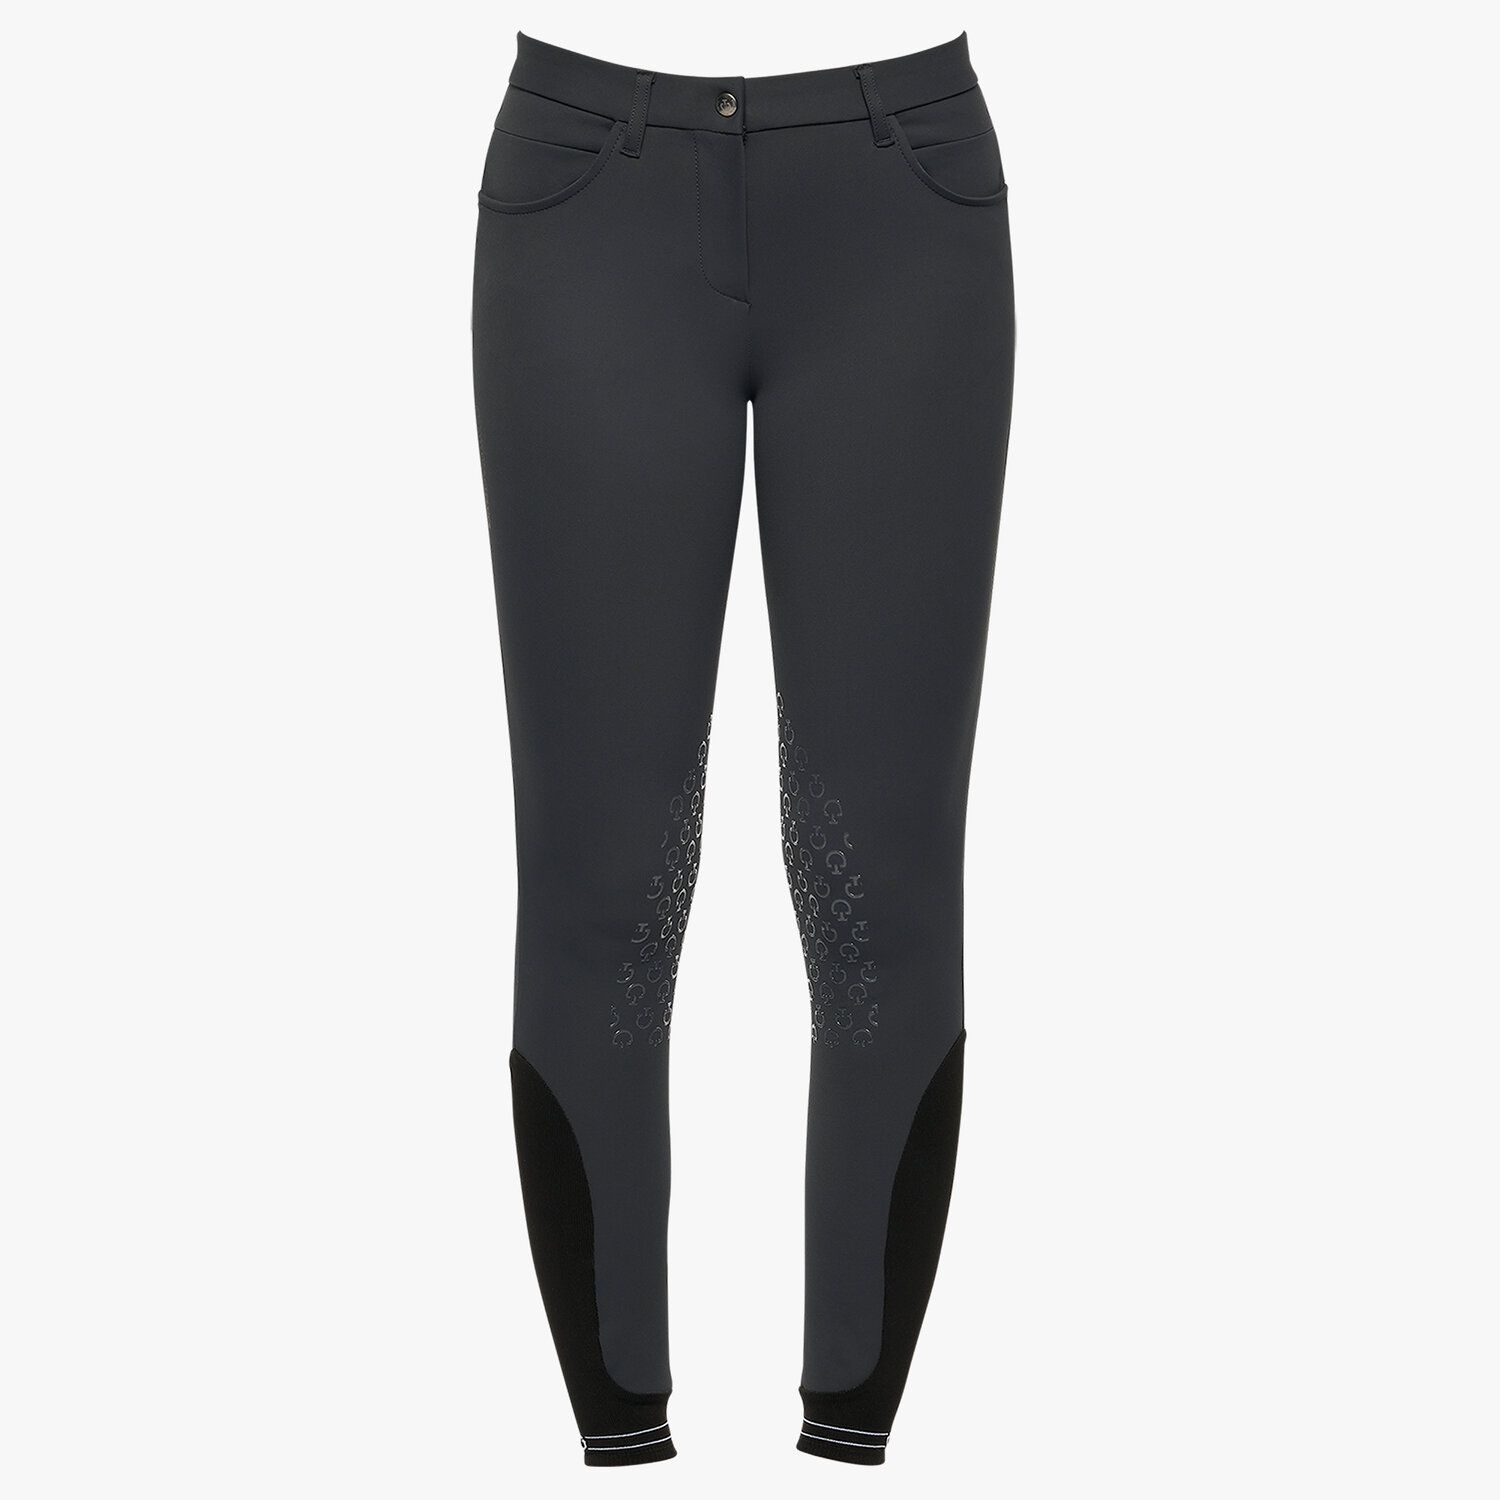 Cavalleria Toscana Women's knee grip breeches with perforated logo tape CHARCOAL GREY-2